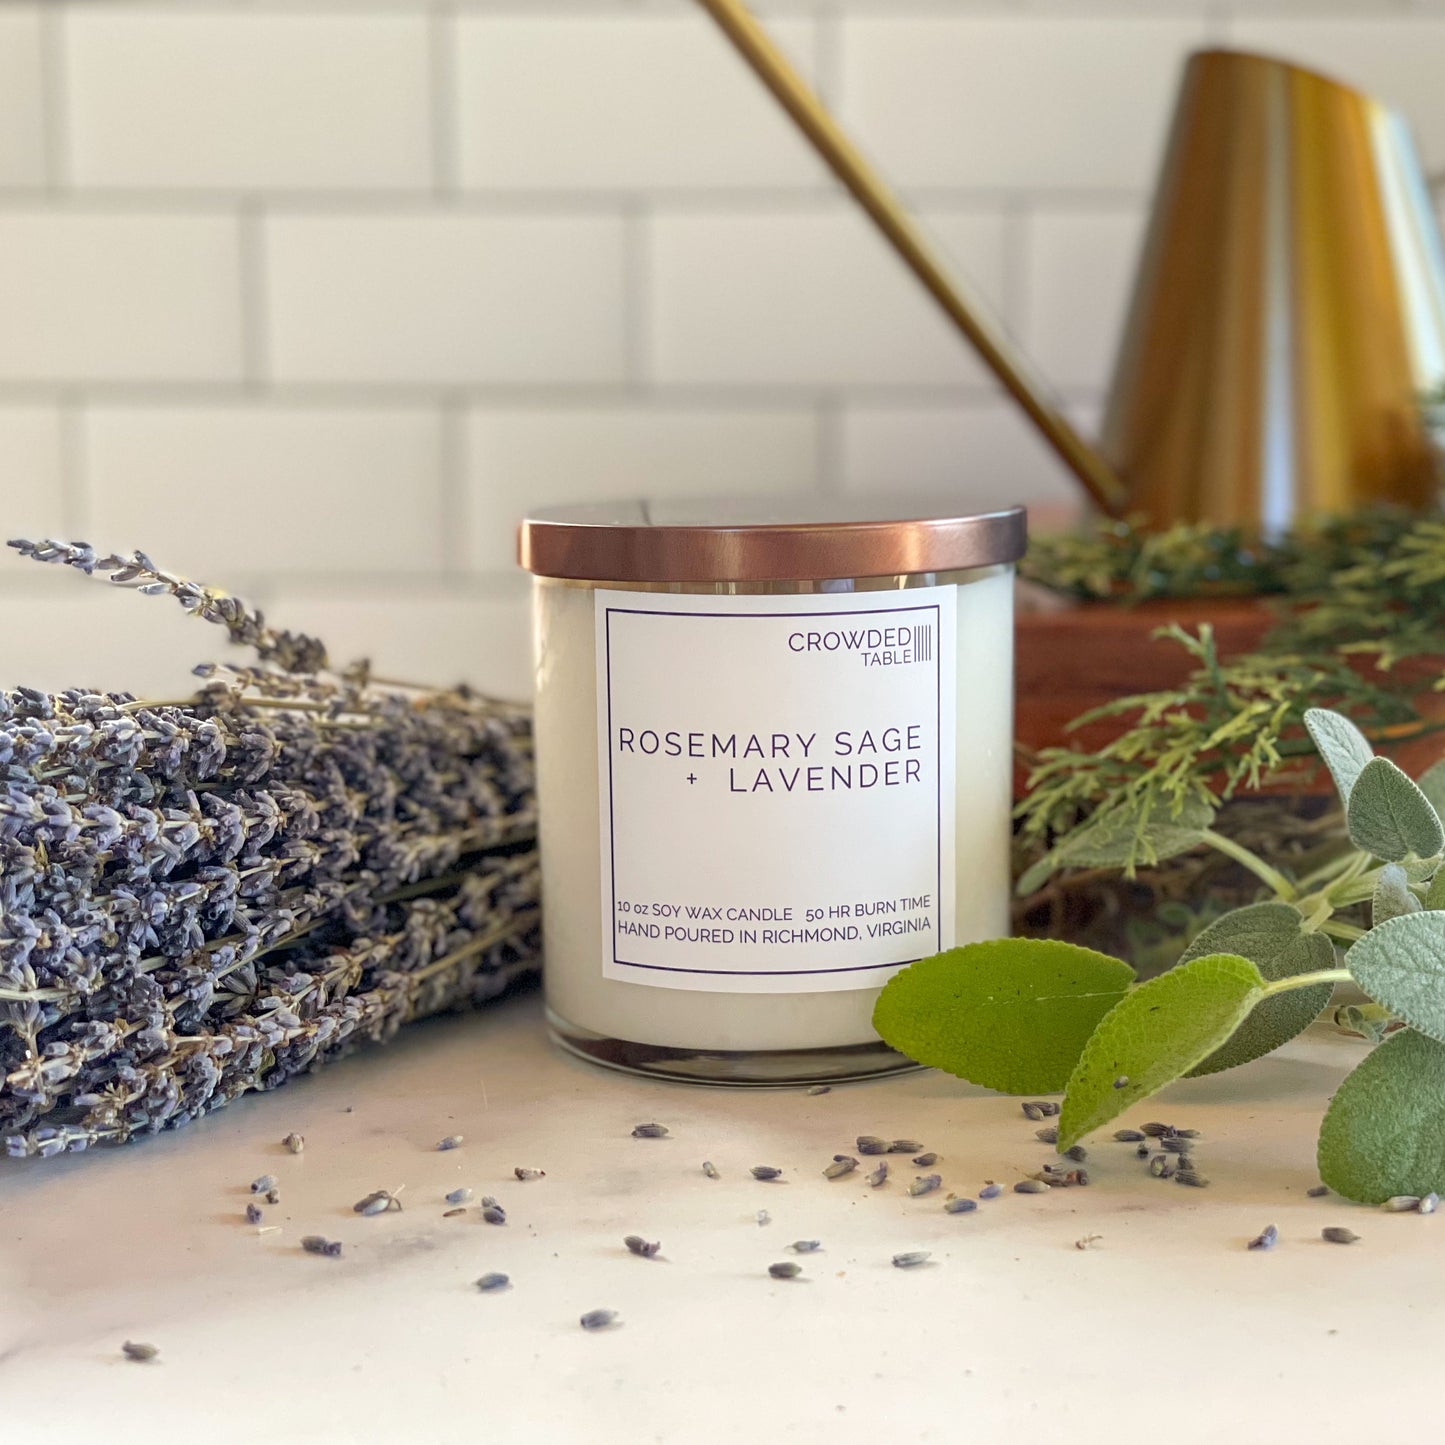 Rosemary Sage + Lavender 10 Oz. Pure Soy Wax Candle